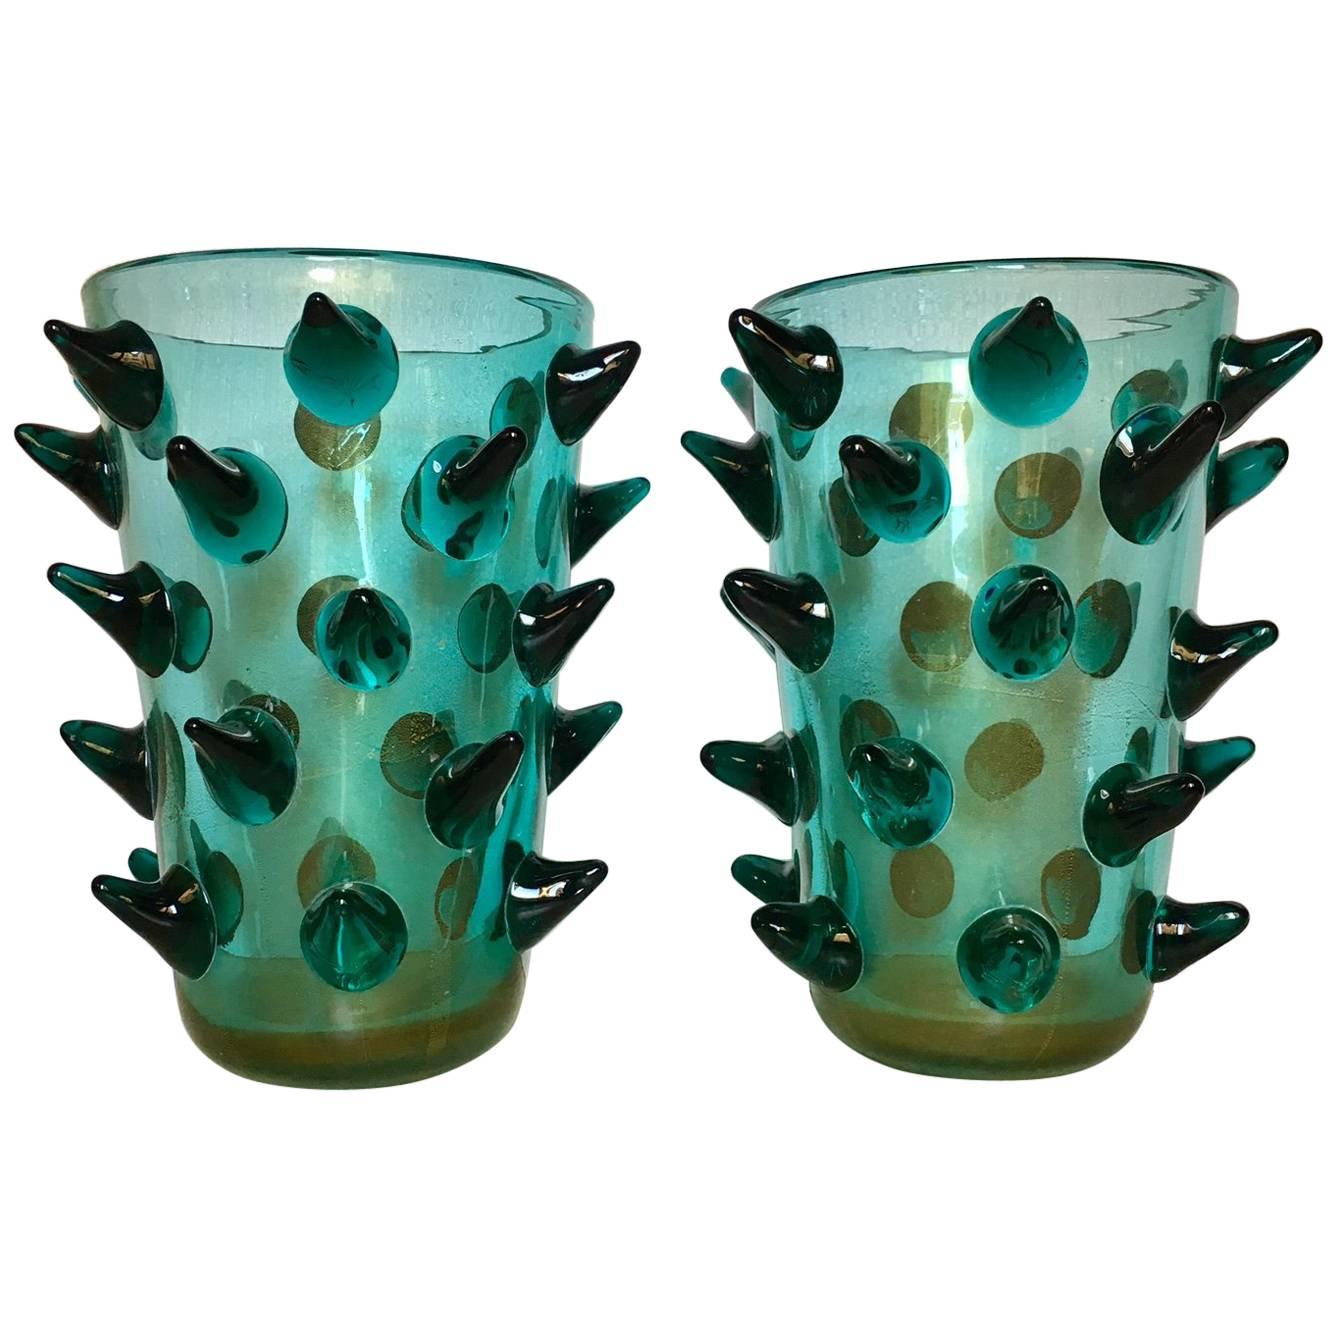 Pair of Murano Vases Signed by Constantini